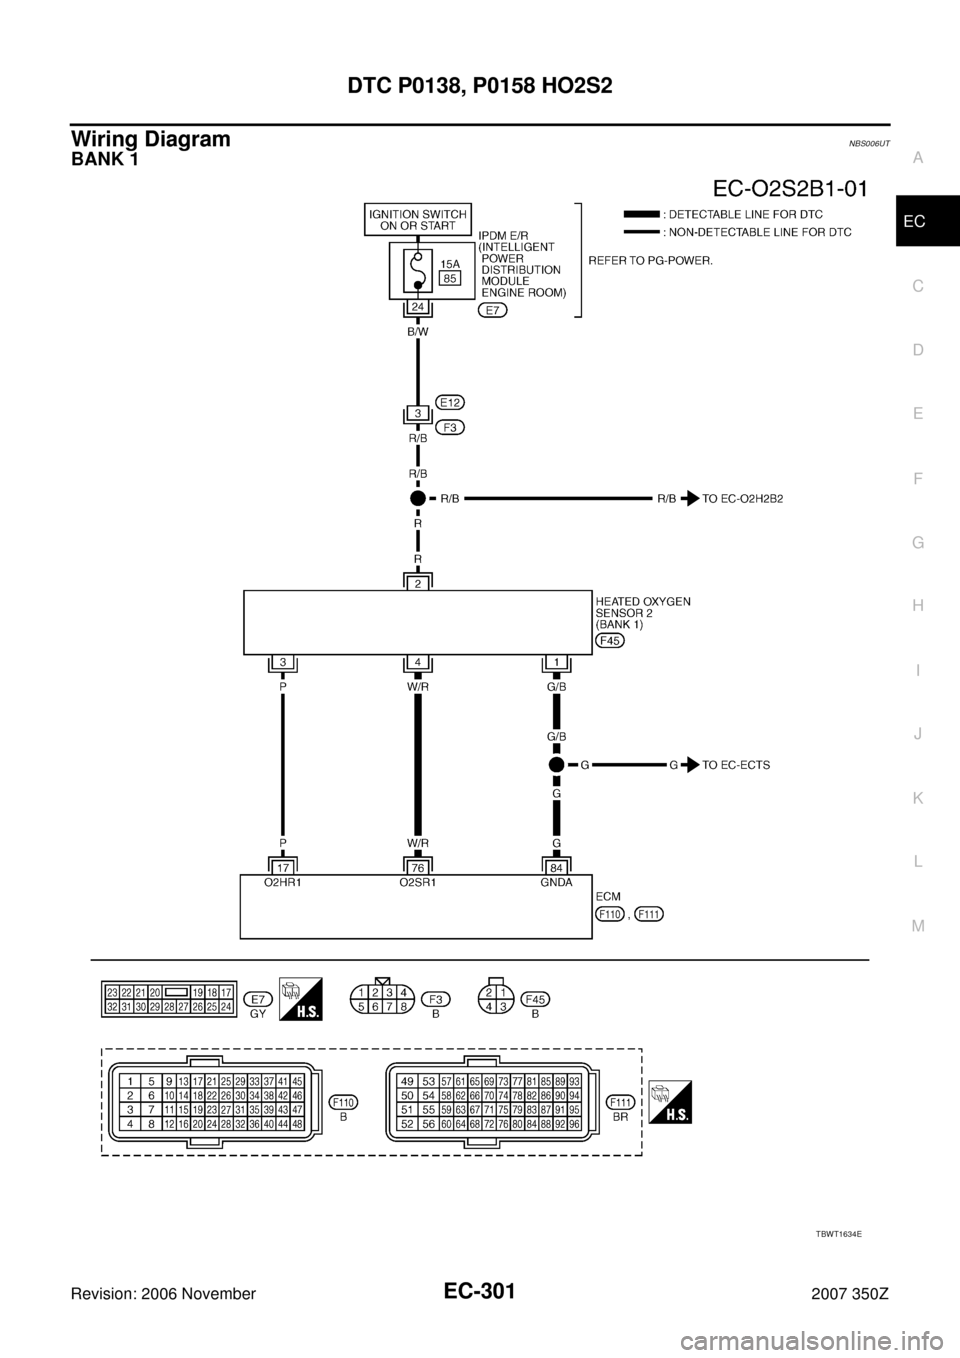 NISSAN 350Z 2007 Z33 Engine Control Service Manual DTC P0138, P0158 HO2S2
EC-301
C
D
E
F
G
H
I
J
K
L
MA
EC
Revision: 2006 November2007 350Z
Wiring DiagramNBS006UT
BANK 1
TBWT1634E 